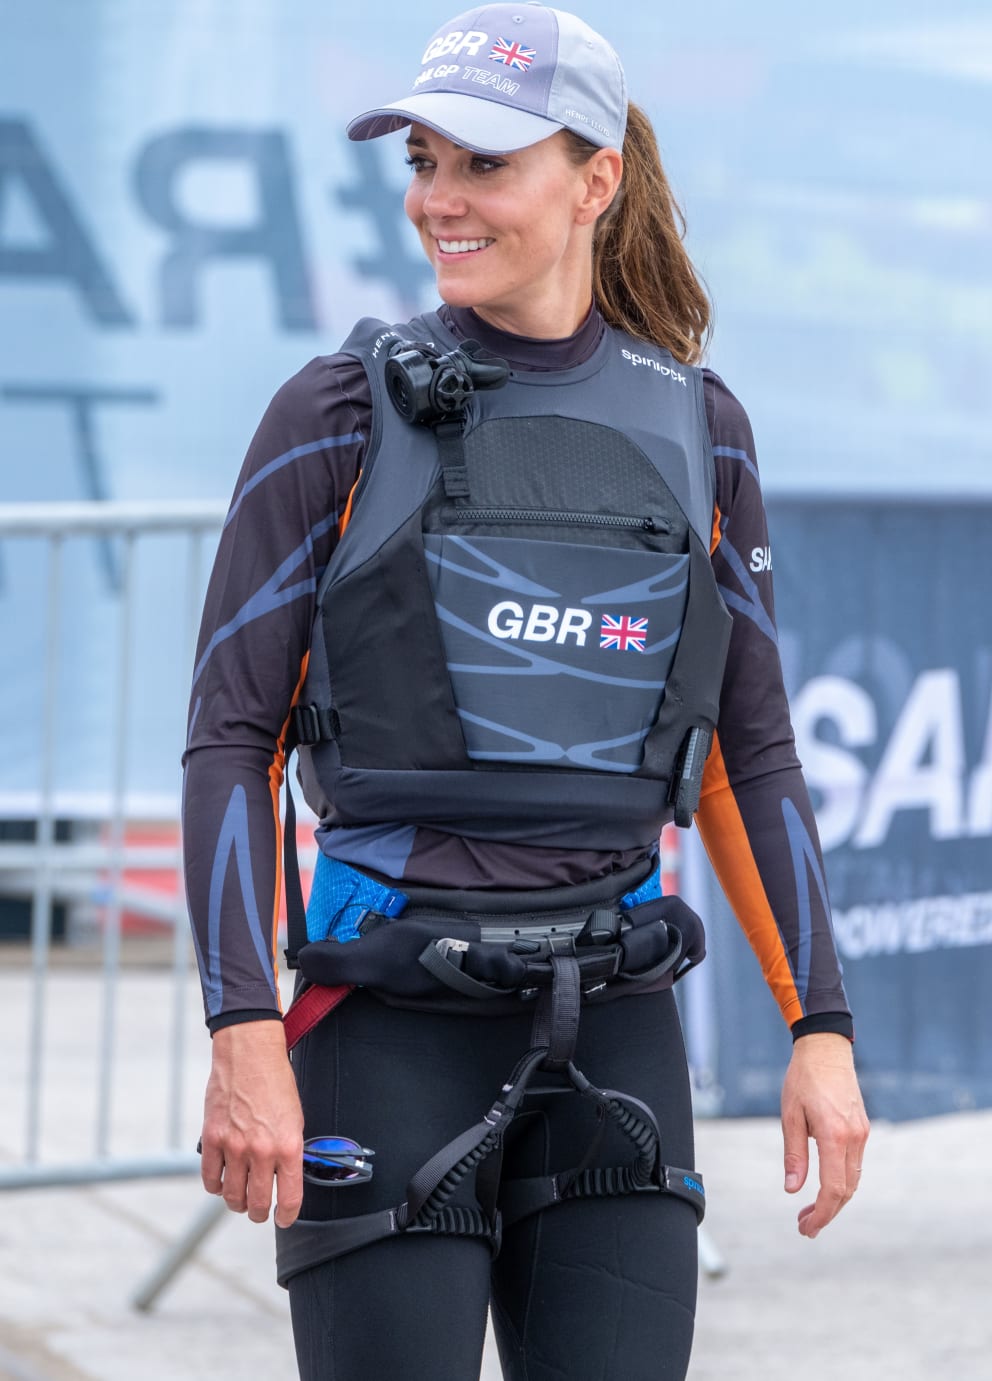 Meanwhile in Plymouth: The Duchess Kate wears a wetsuit before her sailing regatta